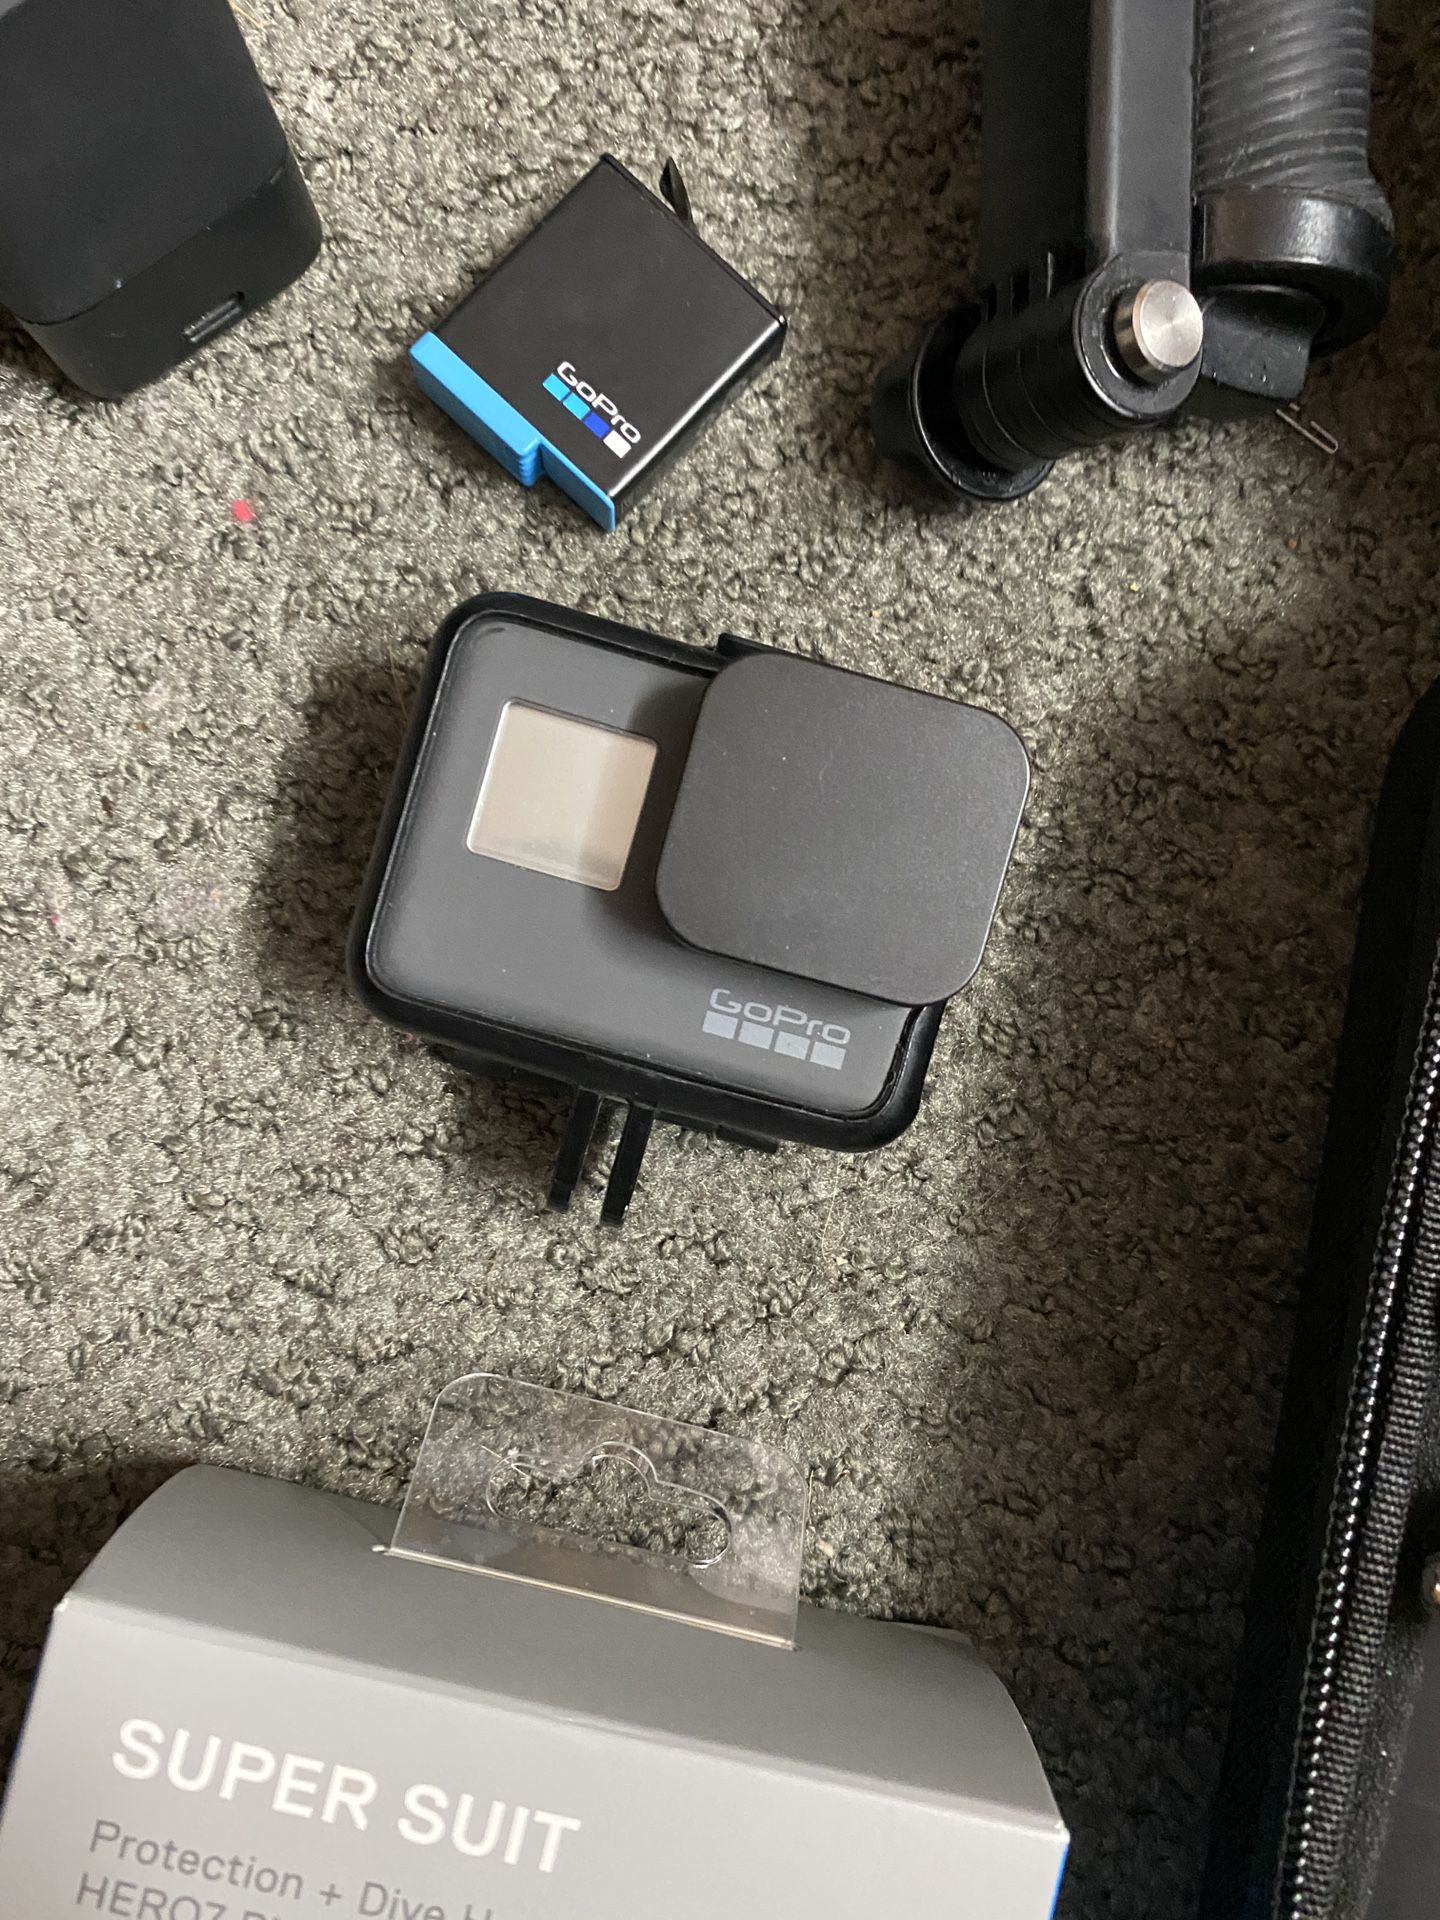 GoPro hero 5 Black with tons of accessories